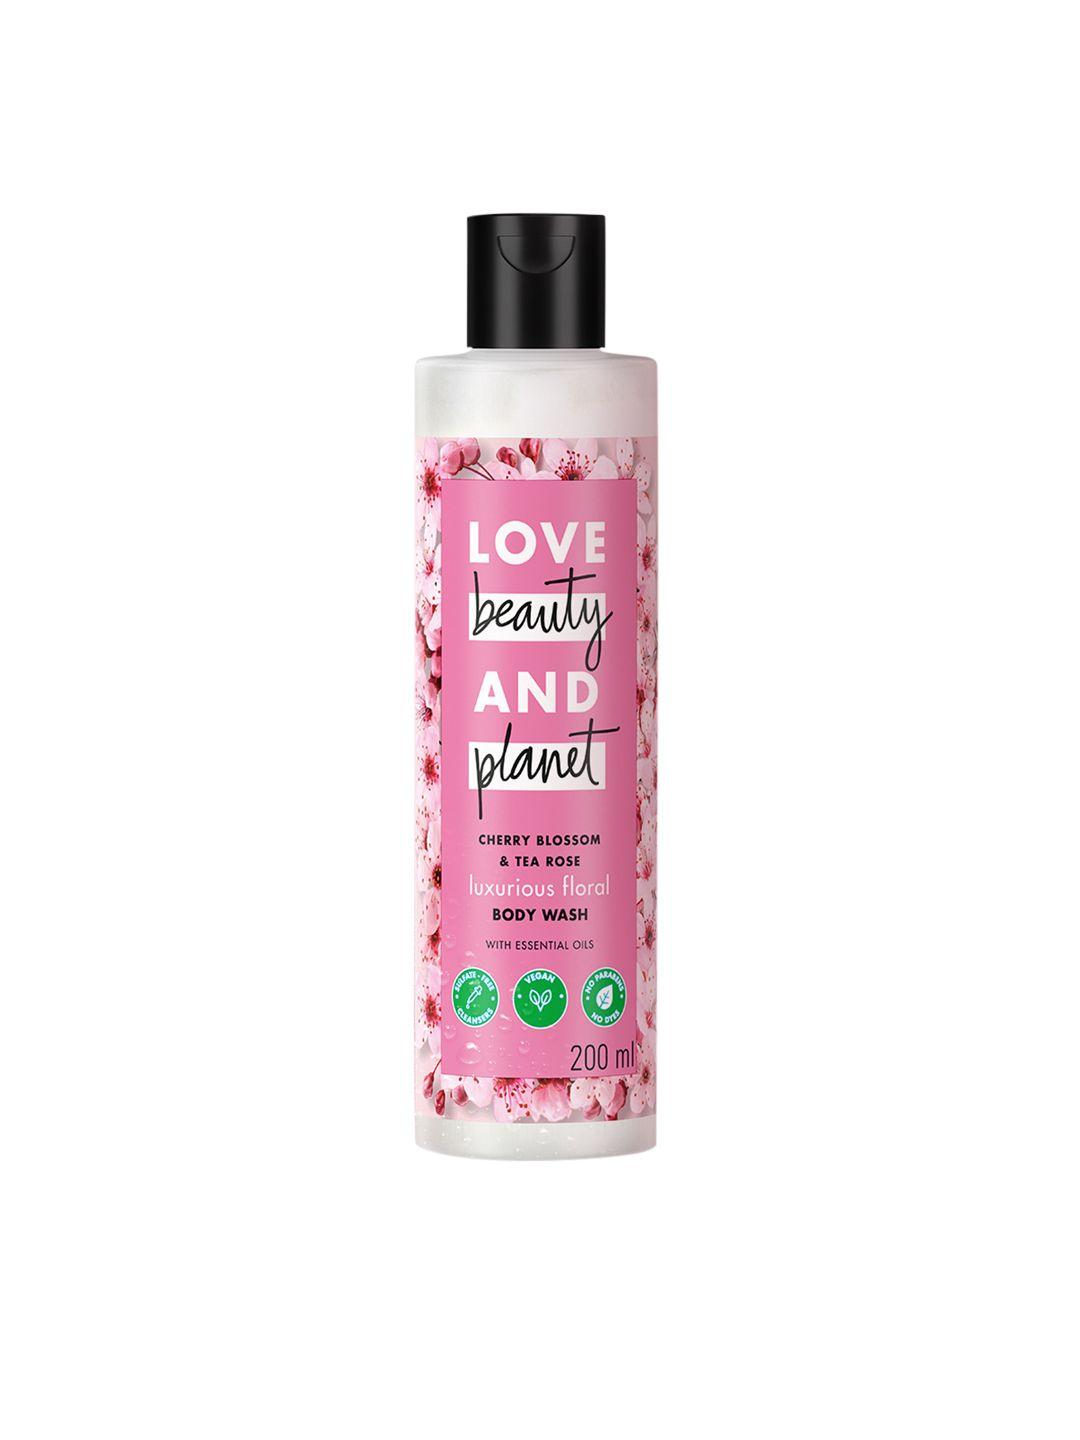 love beauty & planet luxurious cherry blossom body wash with tea rose - 200 ml